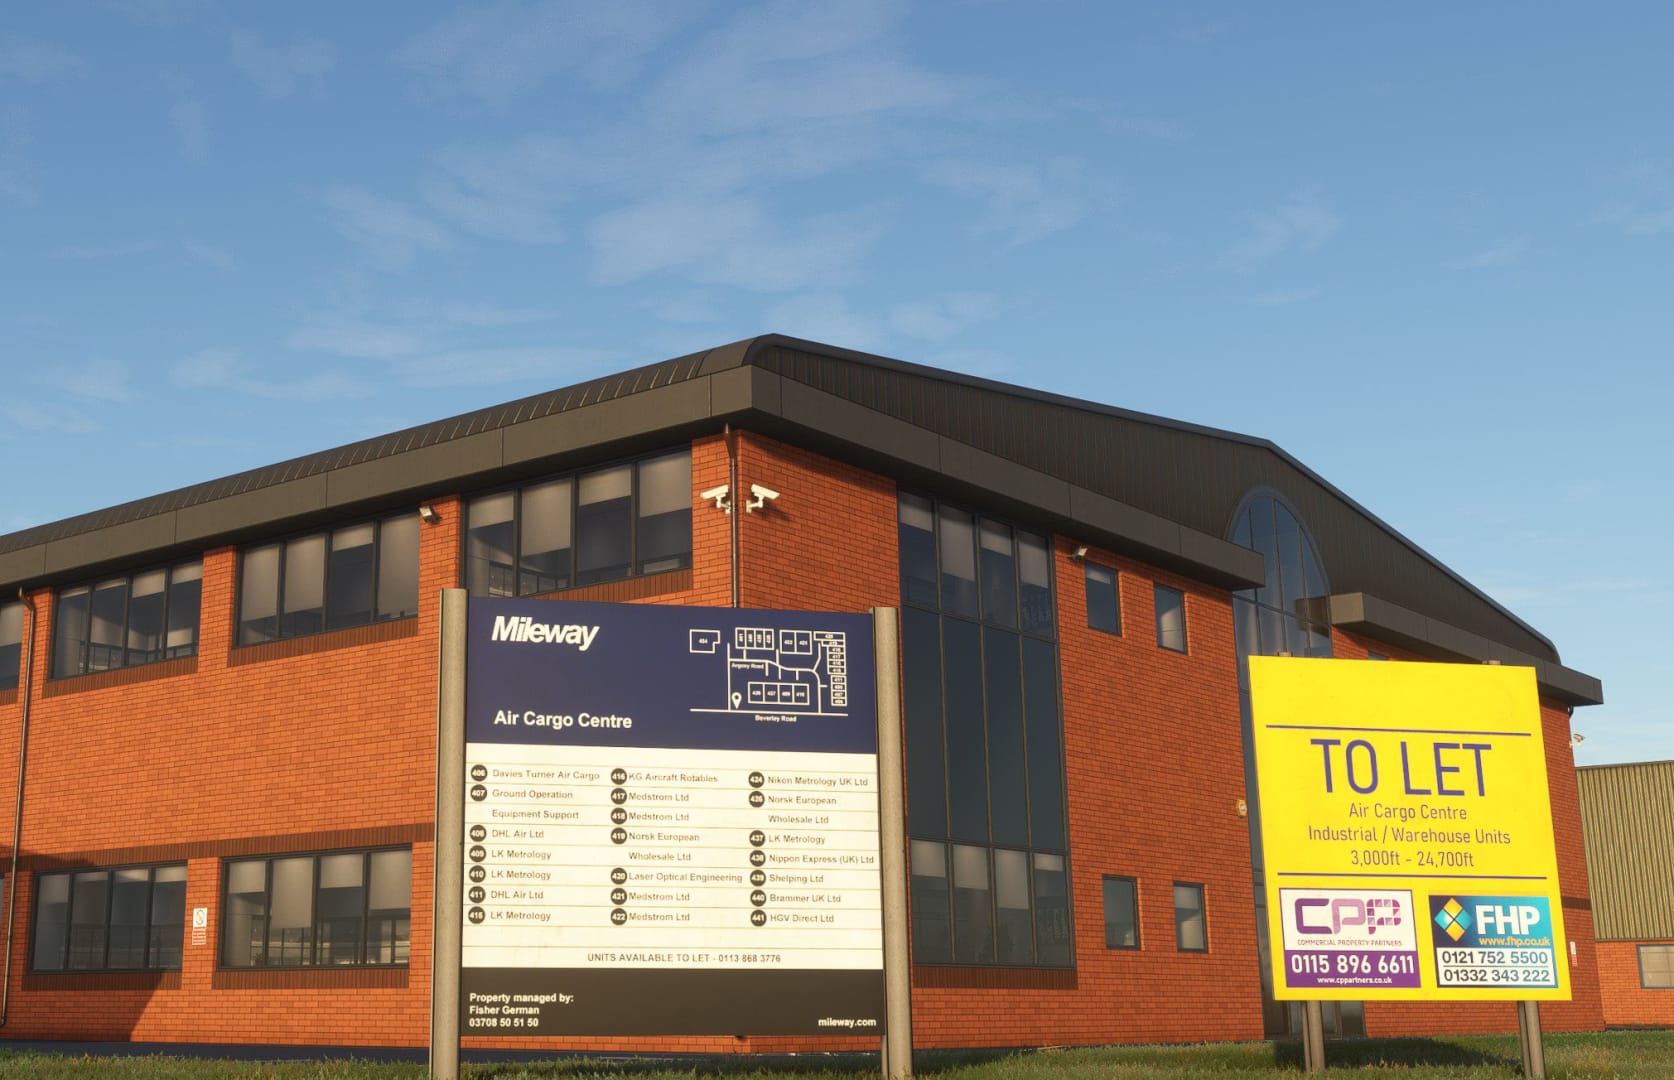 Microsoft Flight Simulator East Midlands Airport by Pyreegue